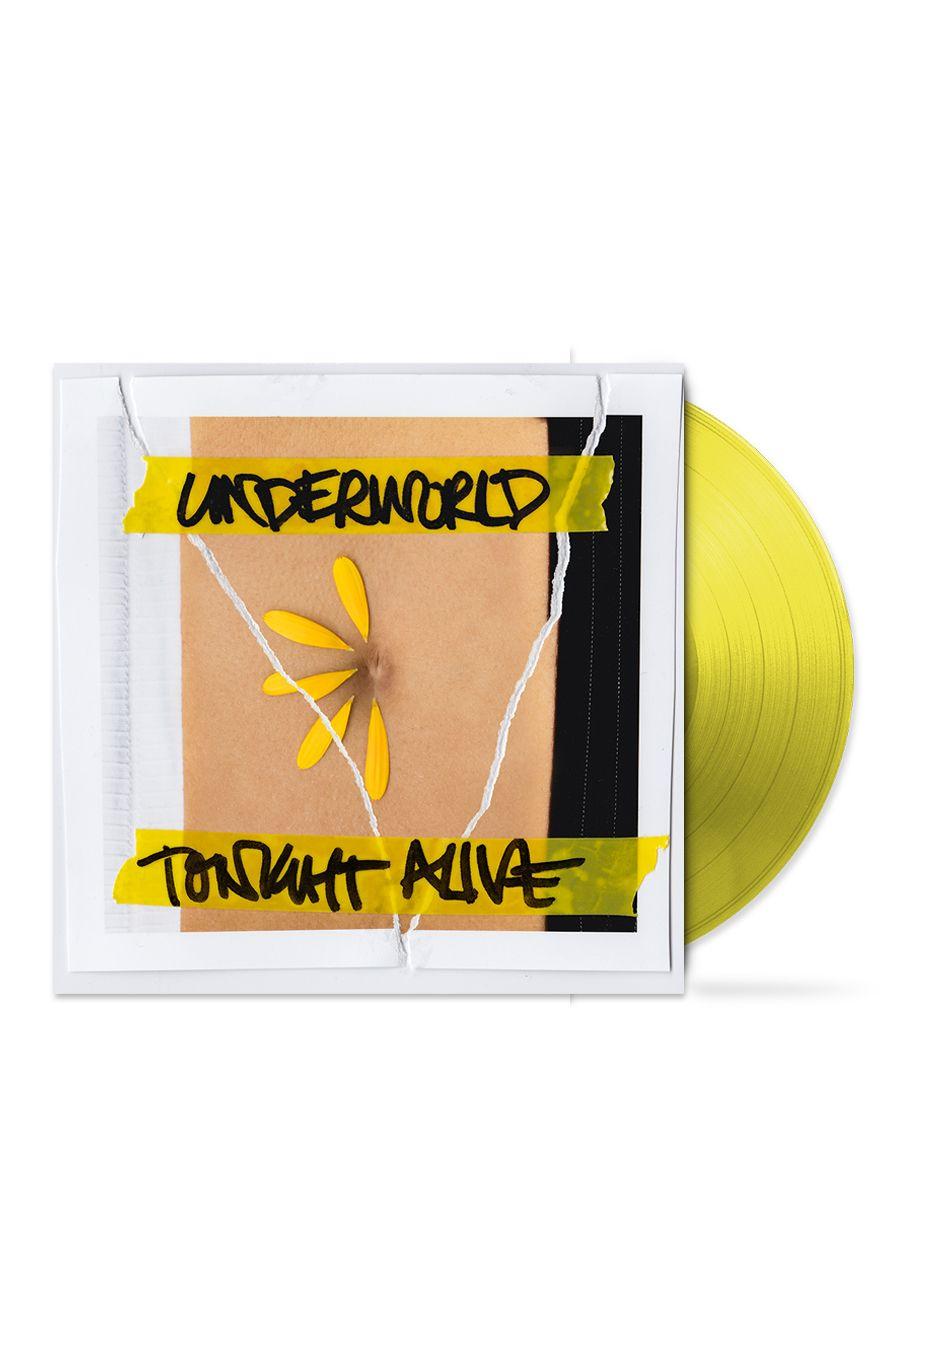 Tonight Alive Logo - Tonight Alive - Underworld Transparent Gold - Colored LP - Official ...